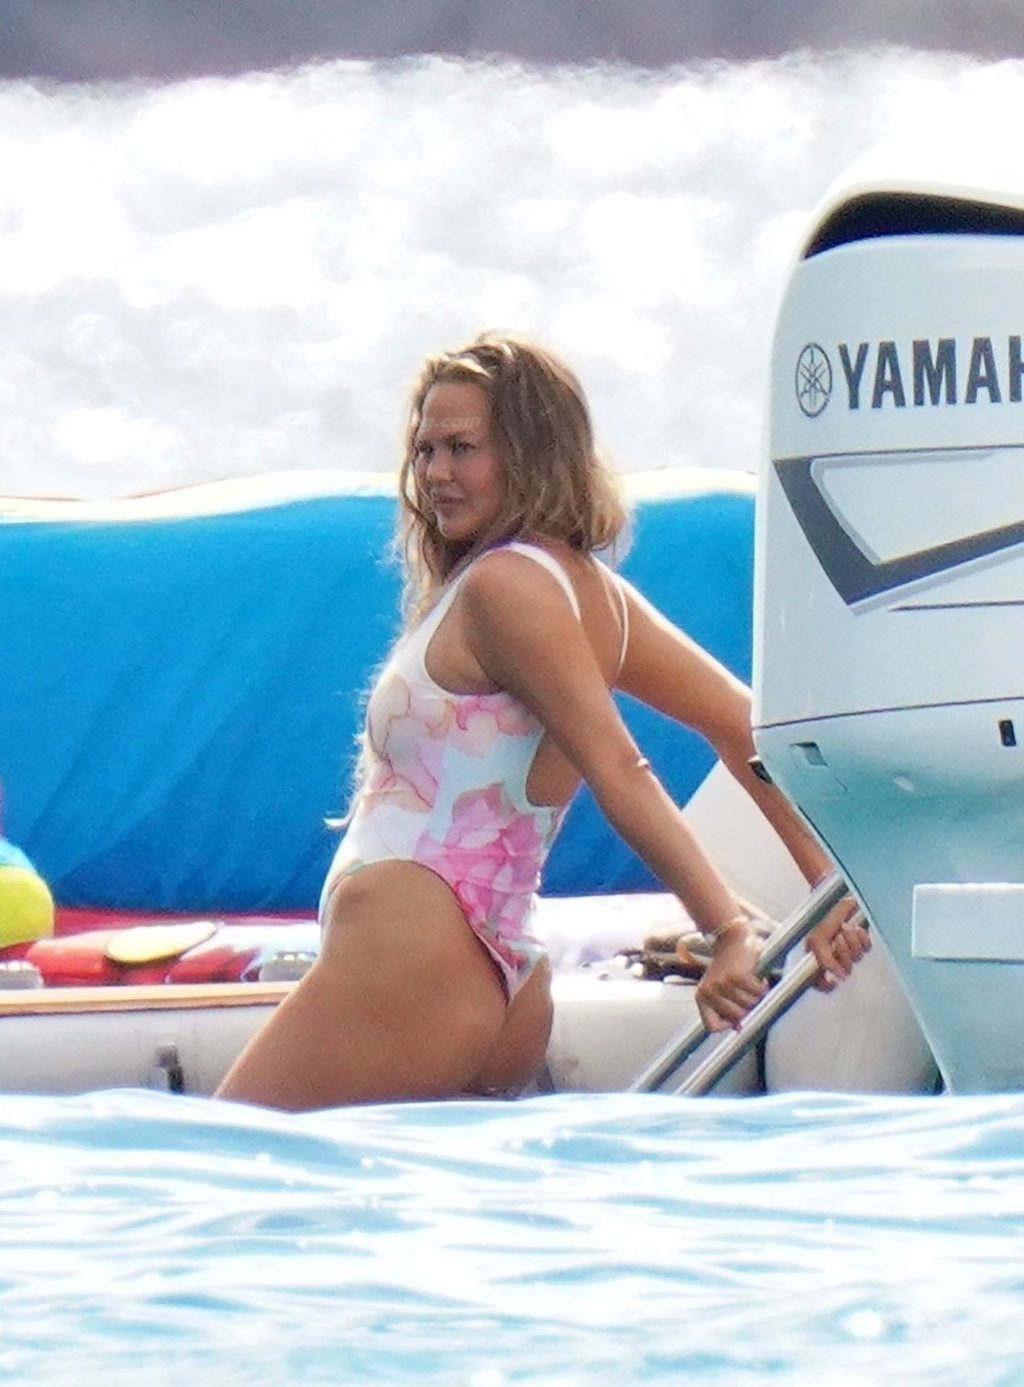 John Legend &amp; Chrissy Teigen Have an Active Day Out on the Water in St Barts (16 Photos)